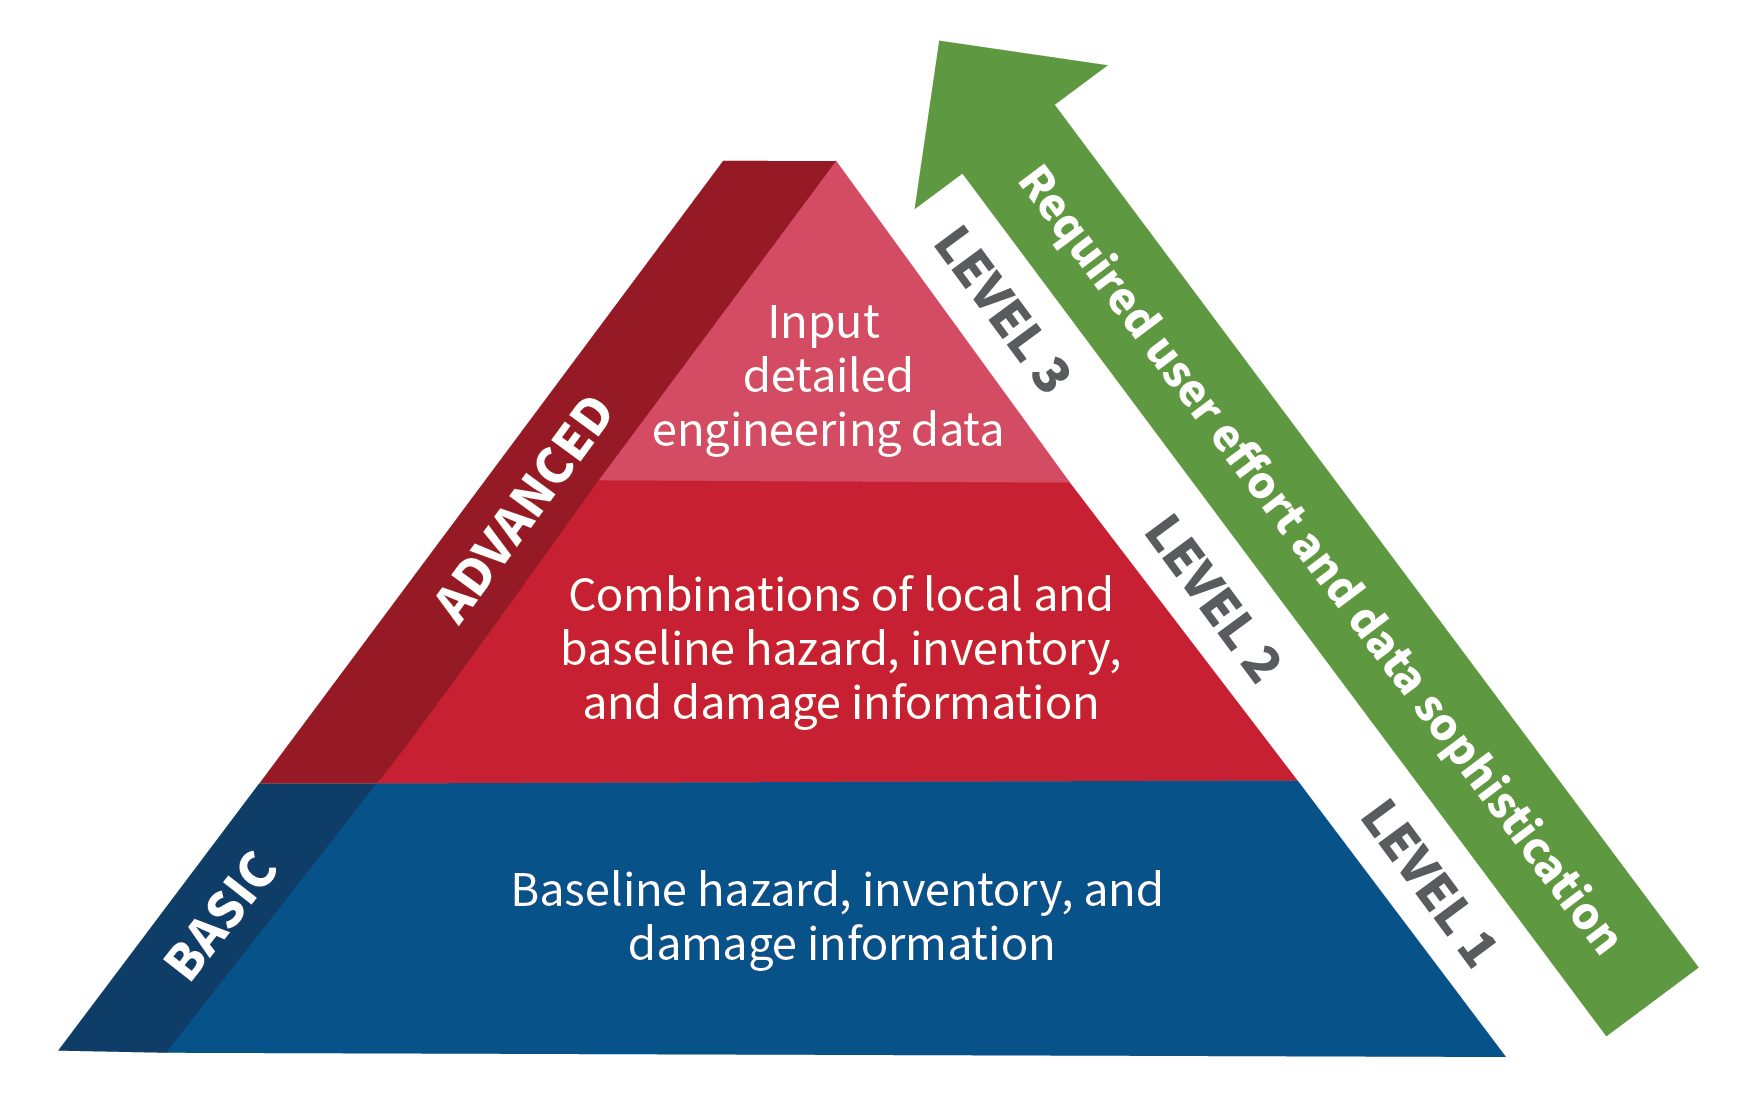 Infographic on how Hazus risk analyses. Hazus risk analyses are categorized as Basic or Advanced, depending on the level of effort and expertise required by the user. The higher the level, stopping at level 3, the more user data and sophistication. 